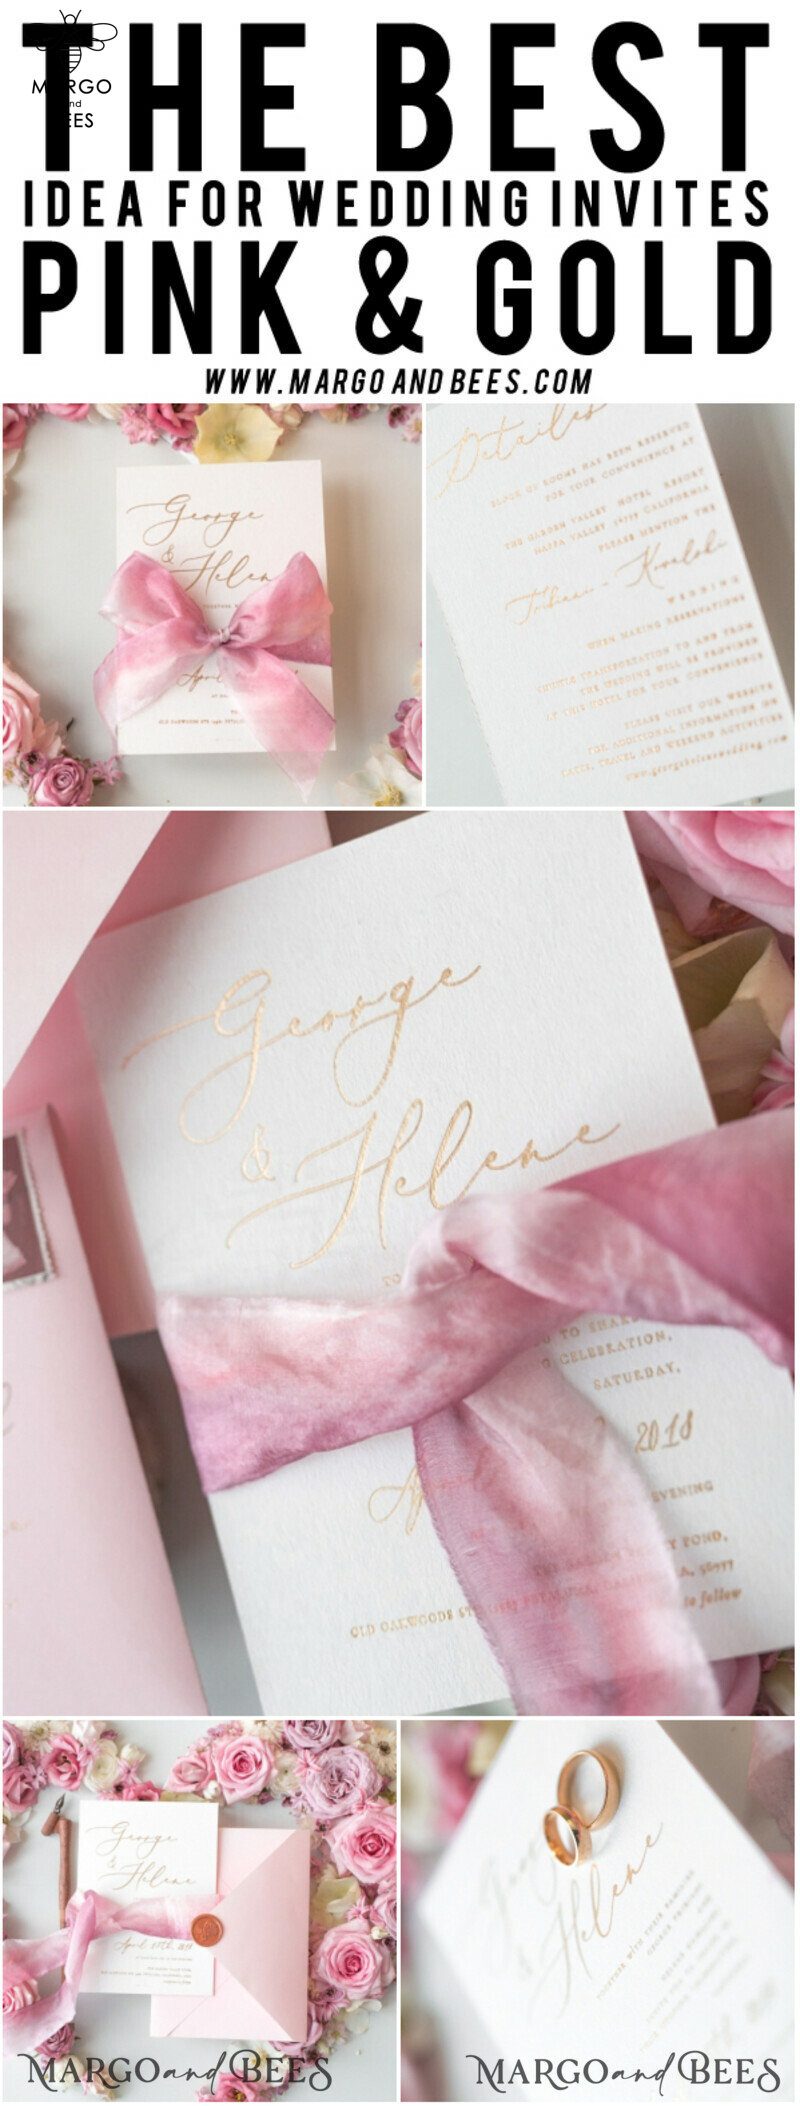  Romantic Blush Pink Wedding Invitations, Vintage Floral Wedding Invitation Suite, Elegant Wedding Cards With Hand Dyed Bow, Glamour Peony Wedding Stationery-51